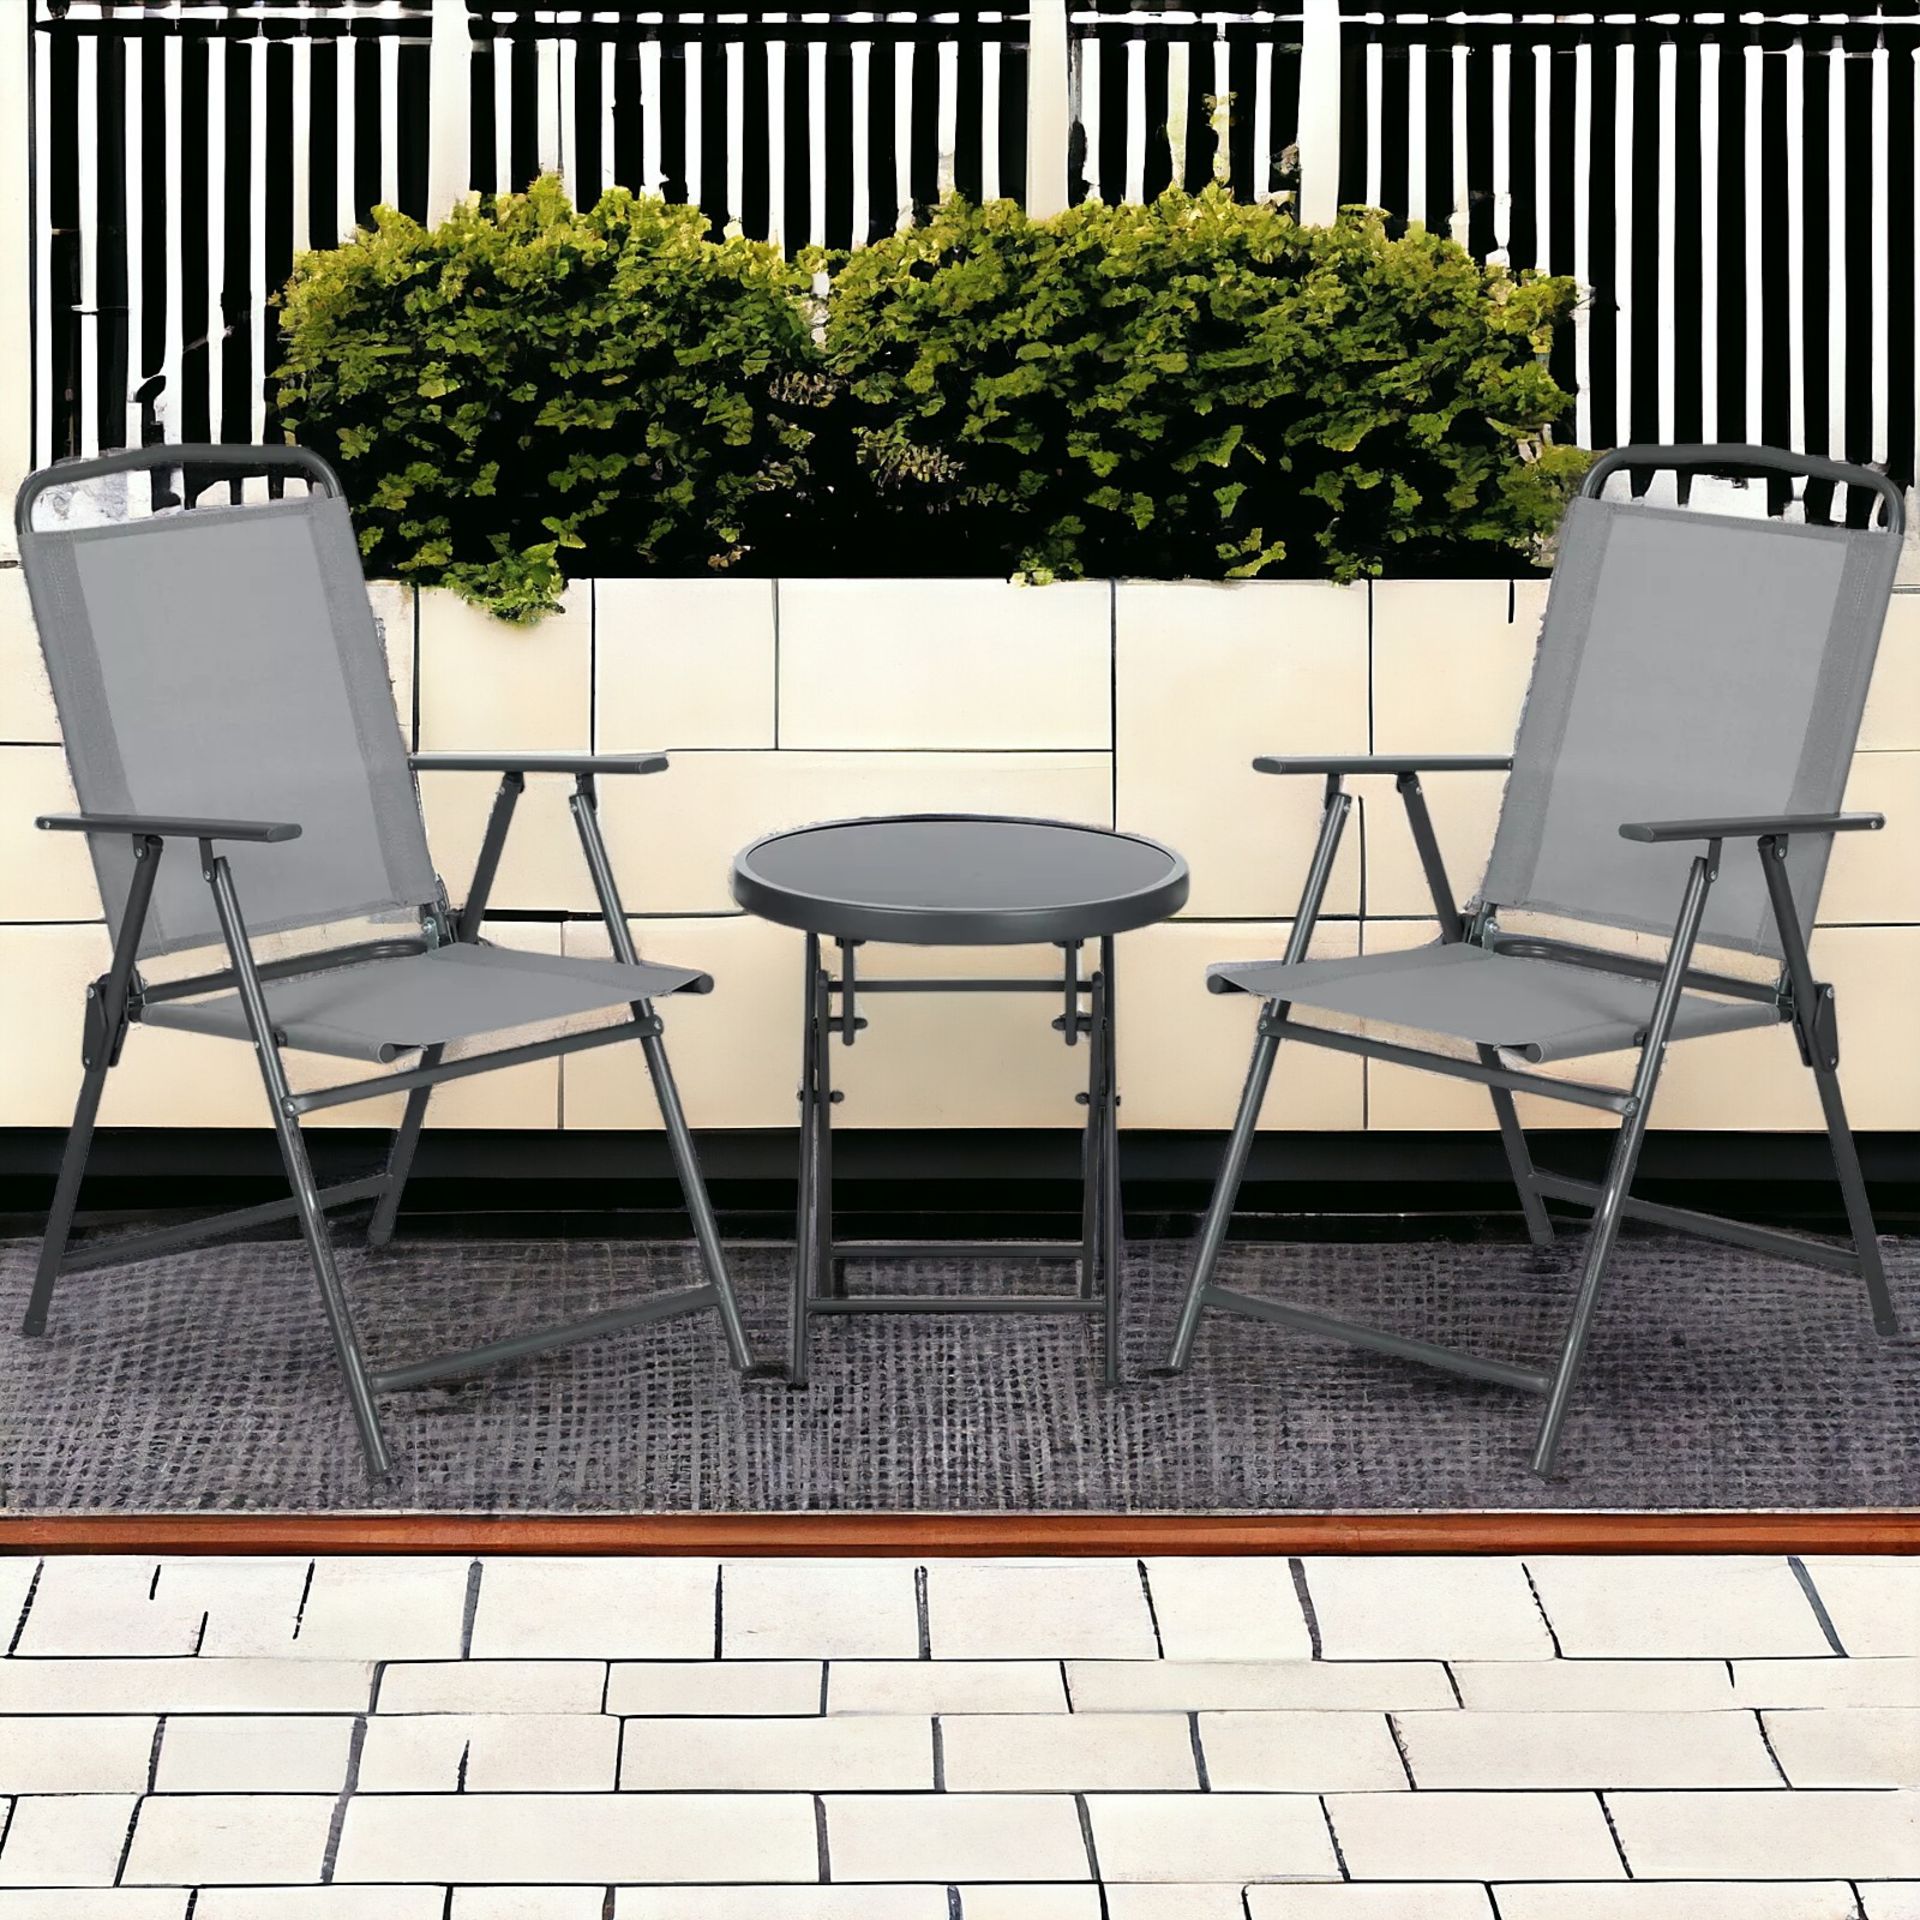 FREE DELIVERY - BRAND NEW PATIO BISTRO SET FOLDING CHAIRS & COFFEE TABLE FOR BALCONY,GREY - Image 2 of 2